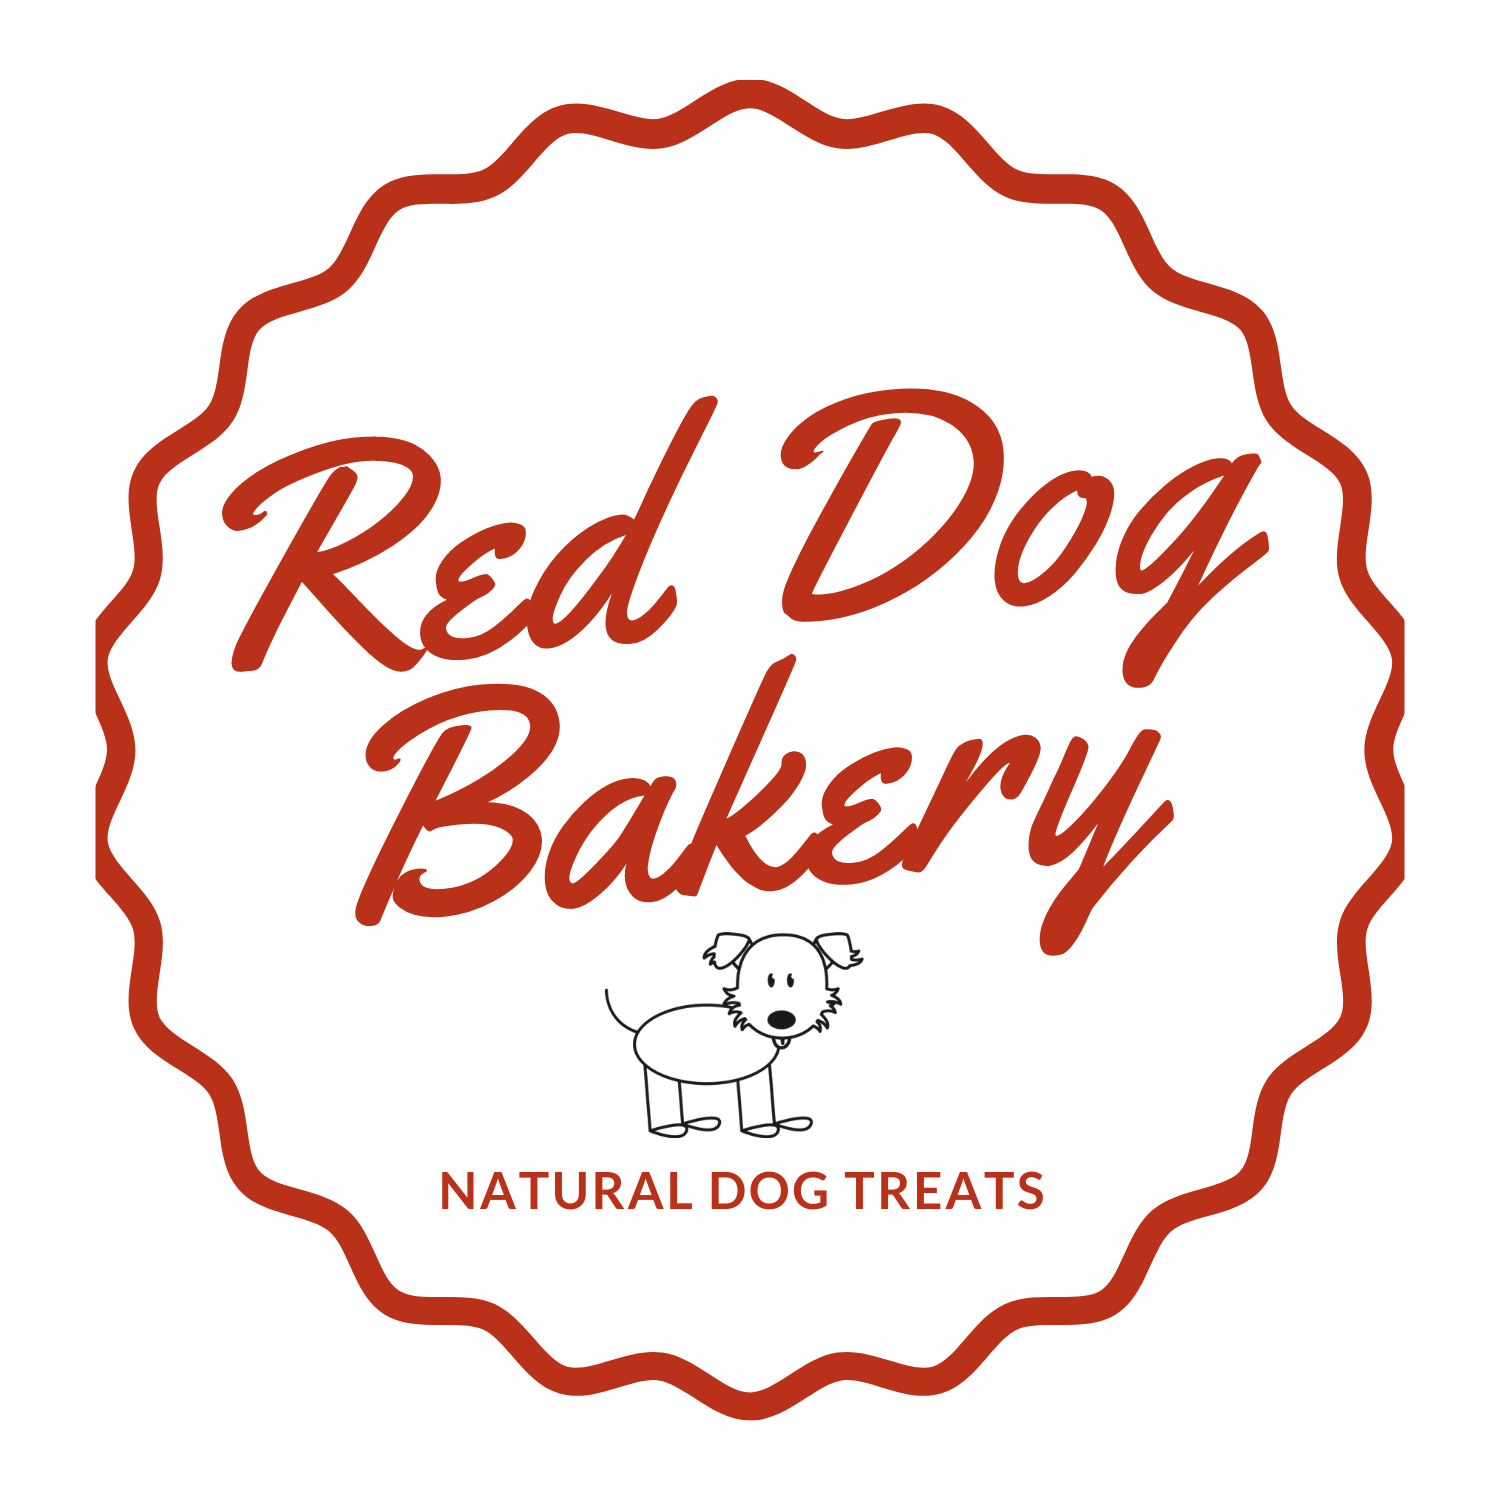 Red Dog Bakery